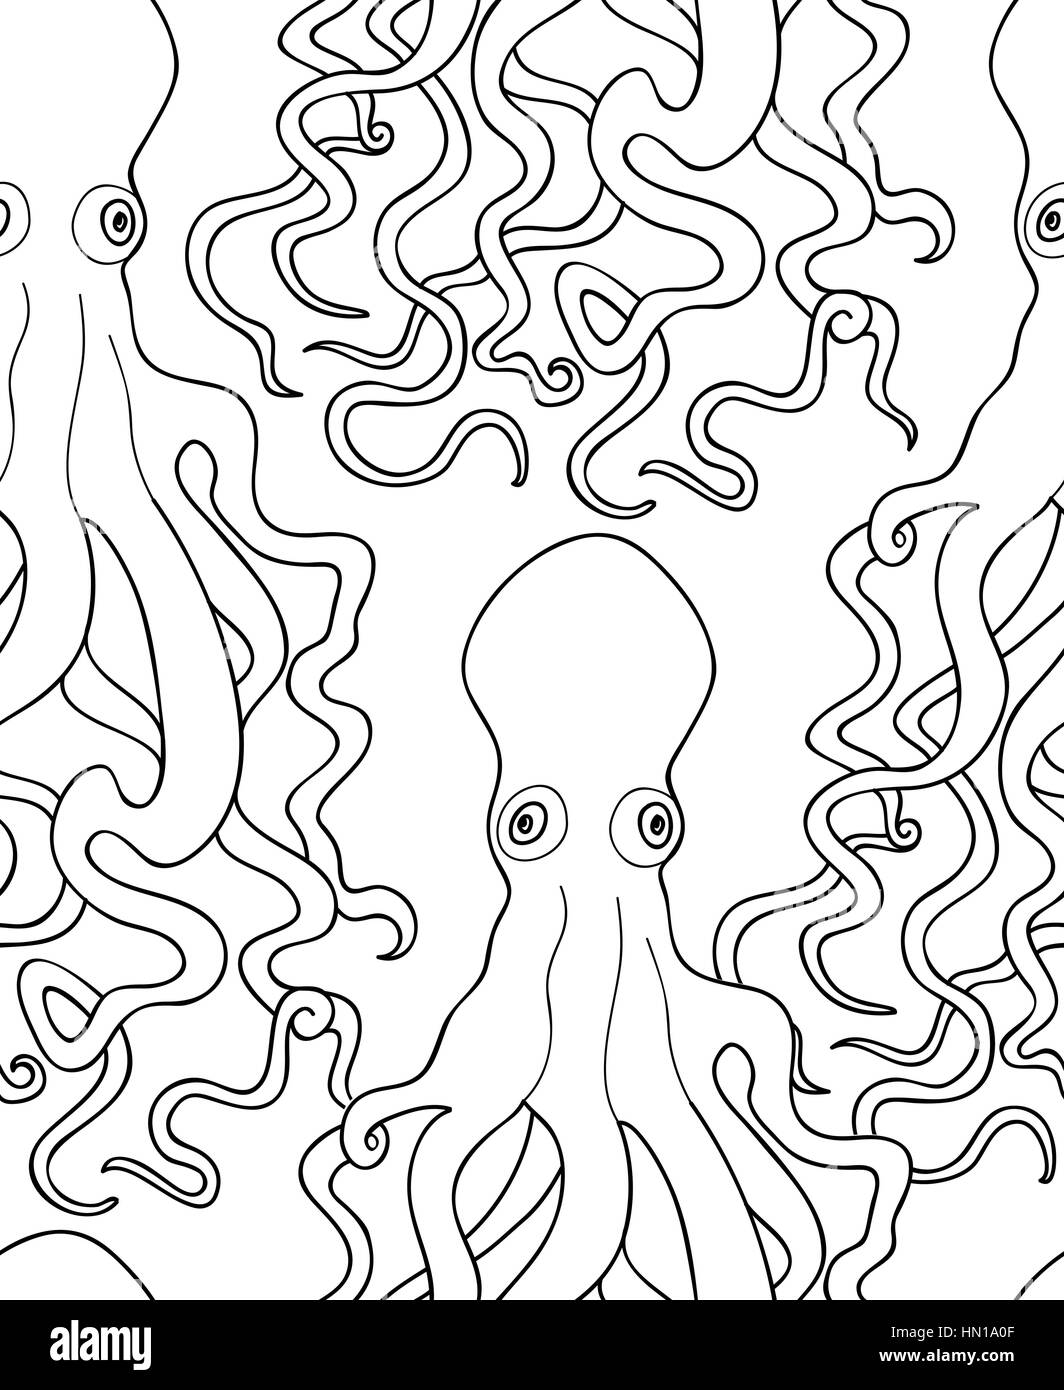 Octopus seamless pattern. Ghost halloween ornament. Marine life tiled background. Underwater seafood ornamental pattern. Stock Vector